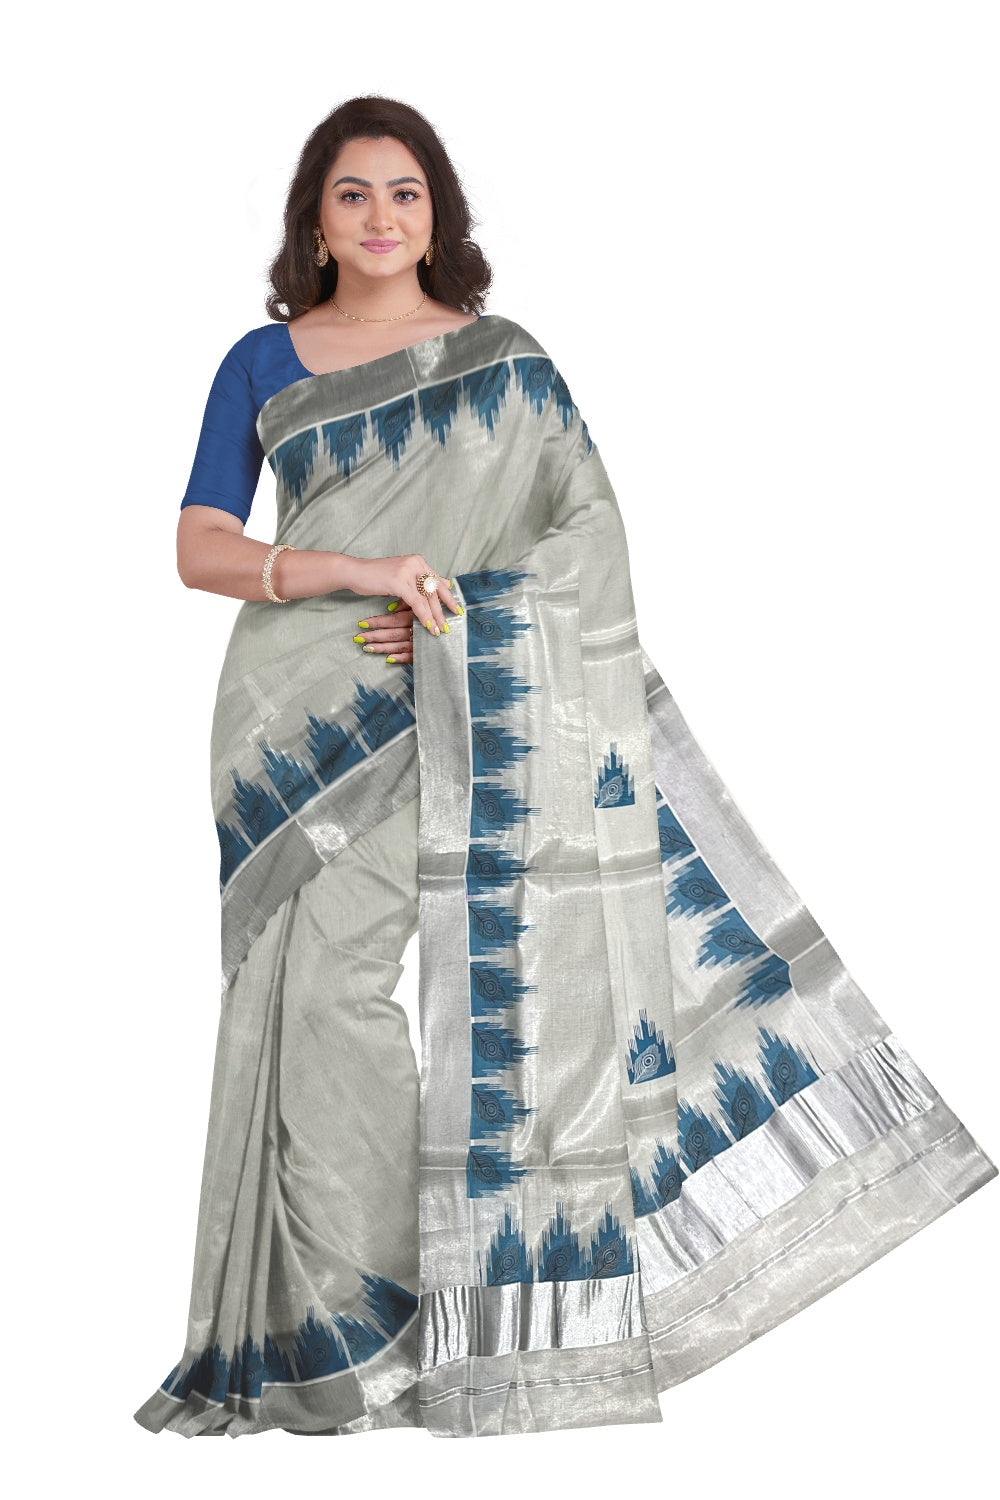 Kerala Silver Tissue Saree with Peacock Feather Mural along with Blue Temple Print